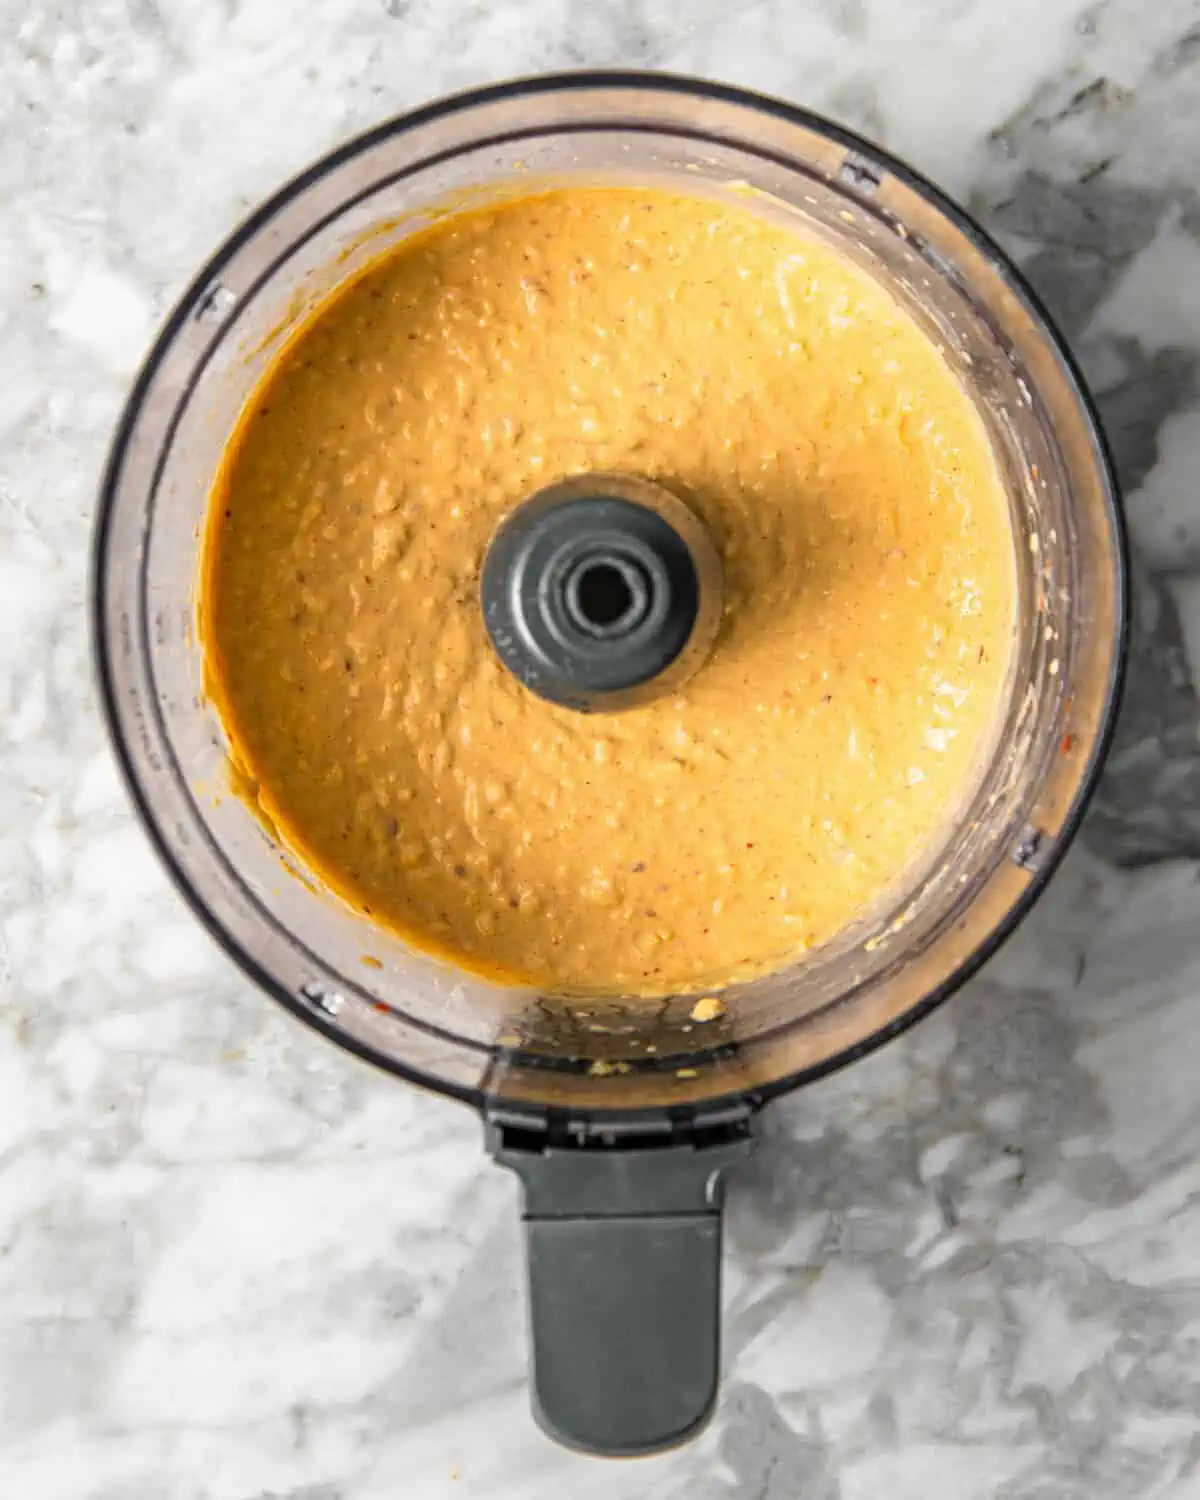 blended hummus in a food processor on a counter.